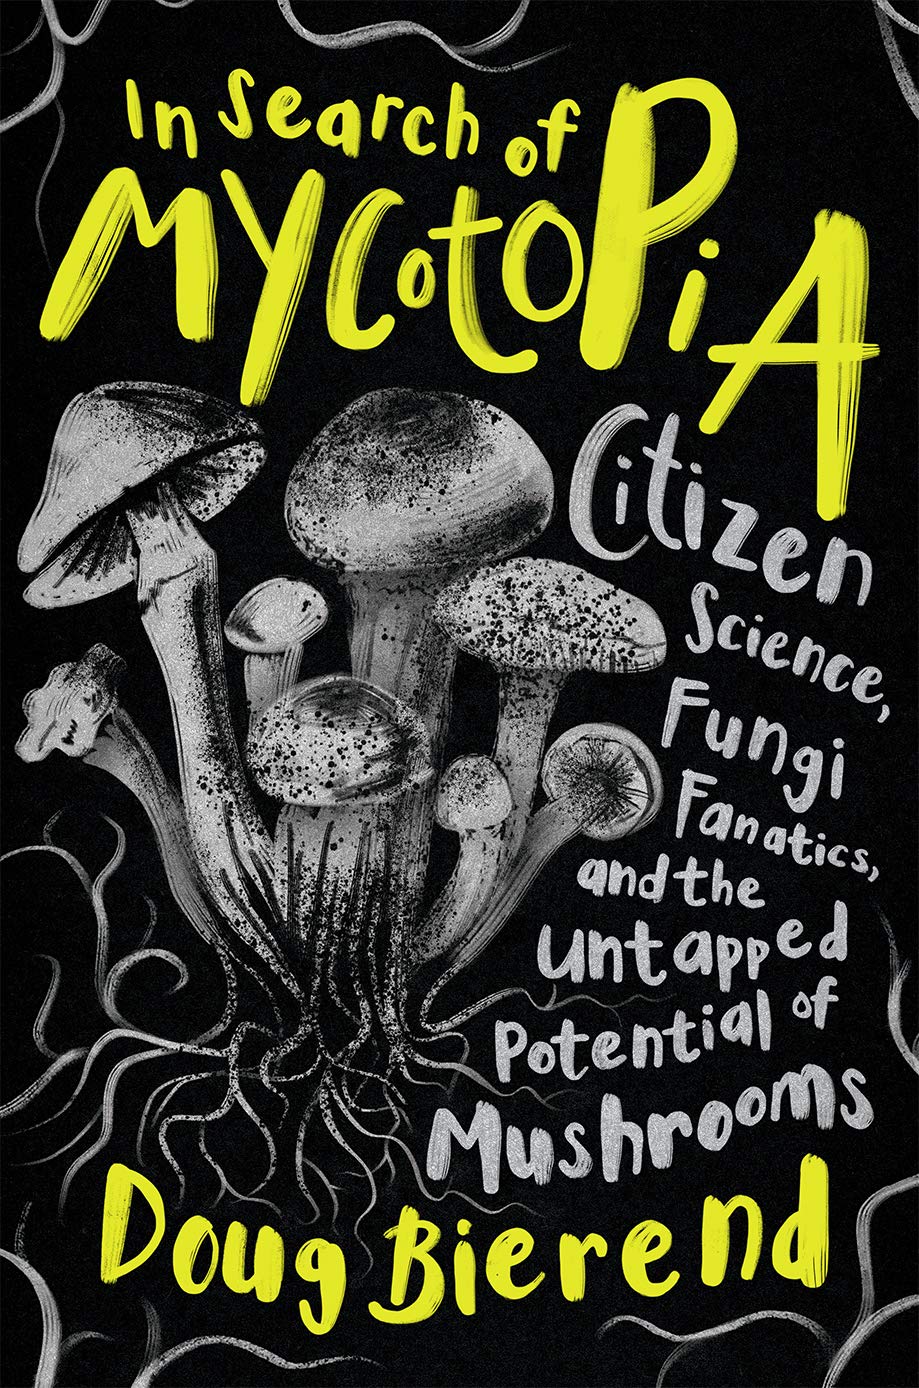 In Search of Mycotopia: Citizen Science, Fungi, Fanatics and the Untapped Potential of Mushrooms (Doug Bierend)